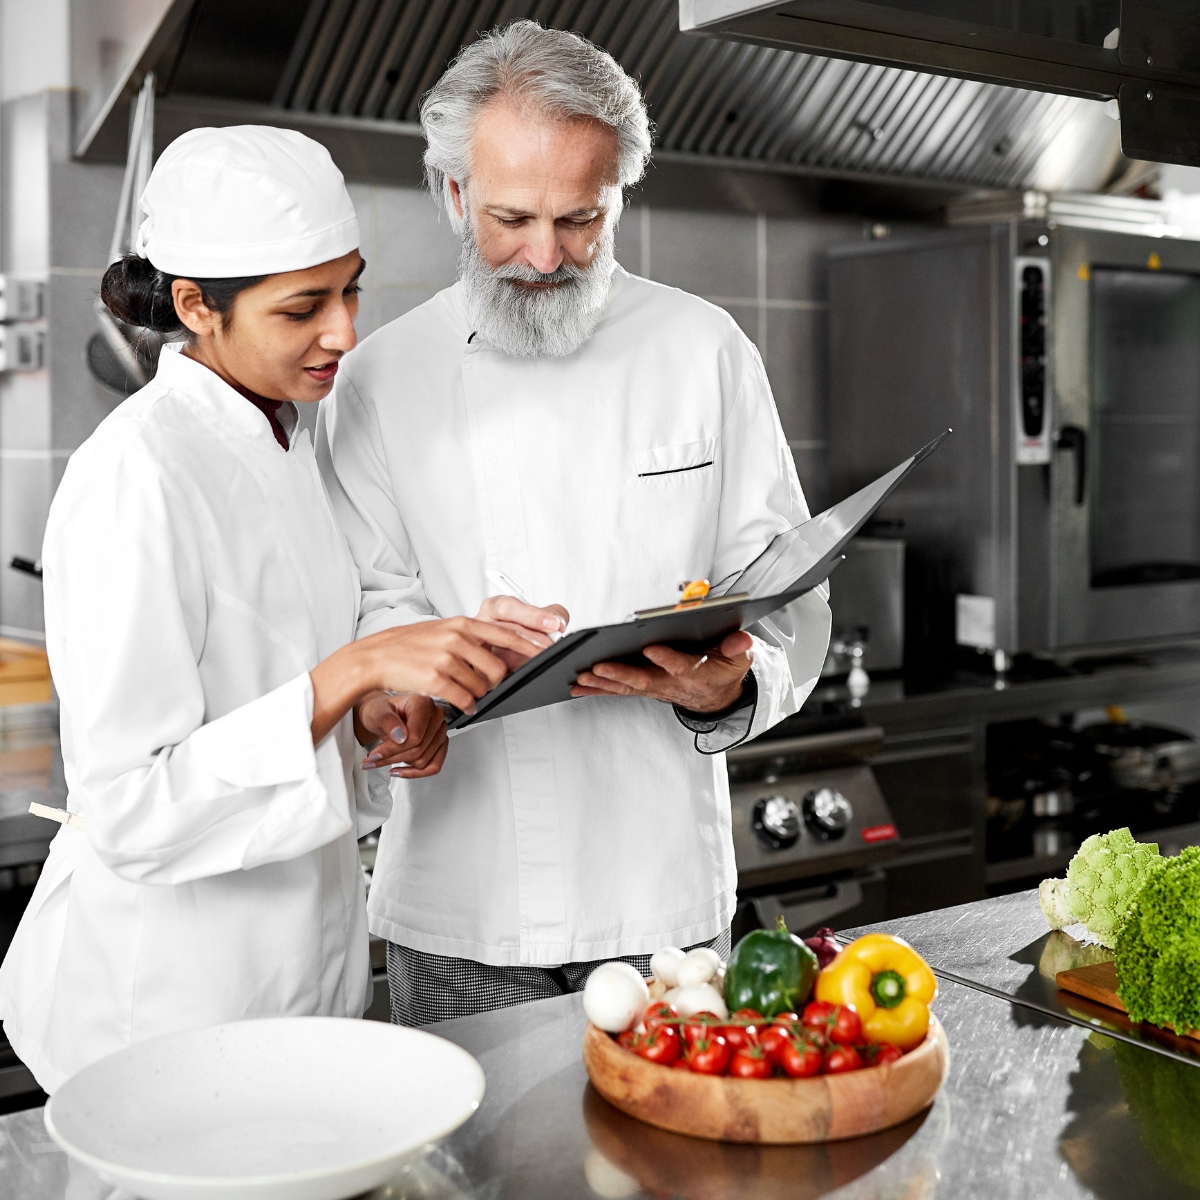 Full Catering Service: Menu Planning and Customization